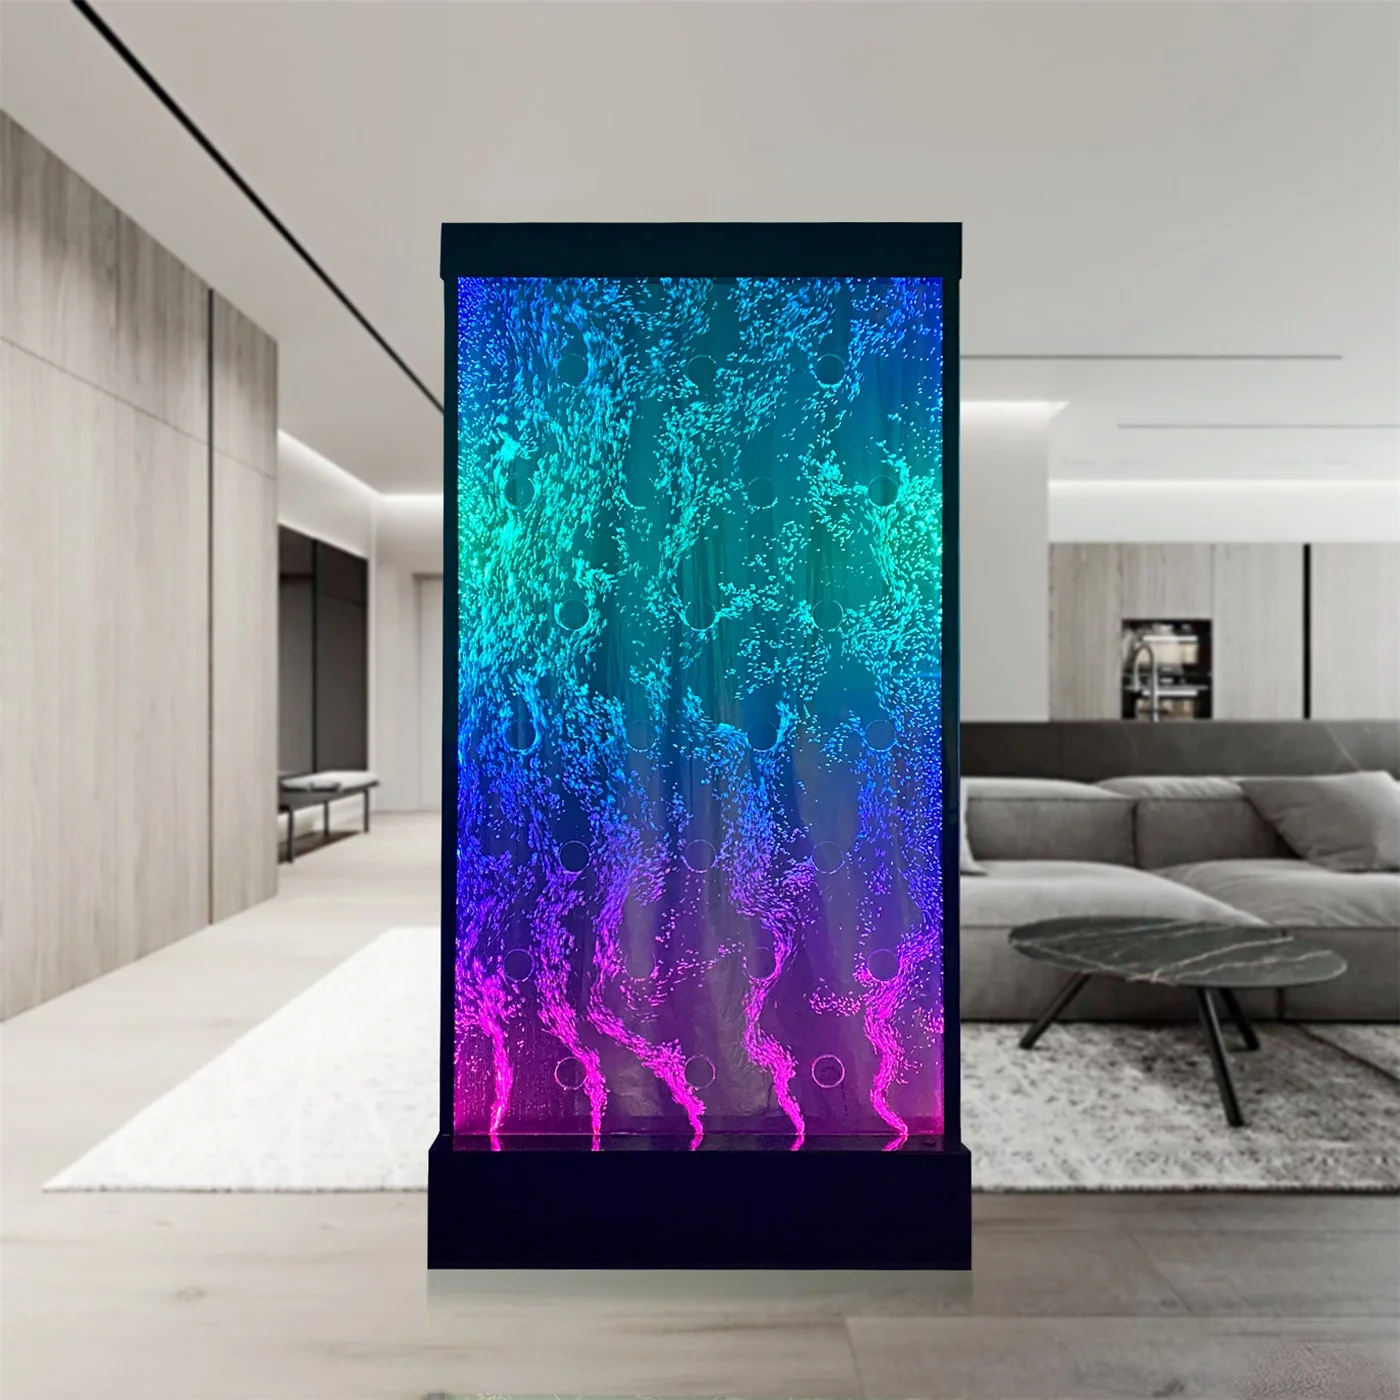 
Custom made floor standing led water bubble wall with company logos 